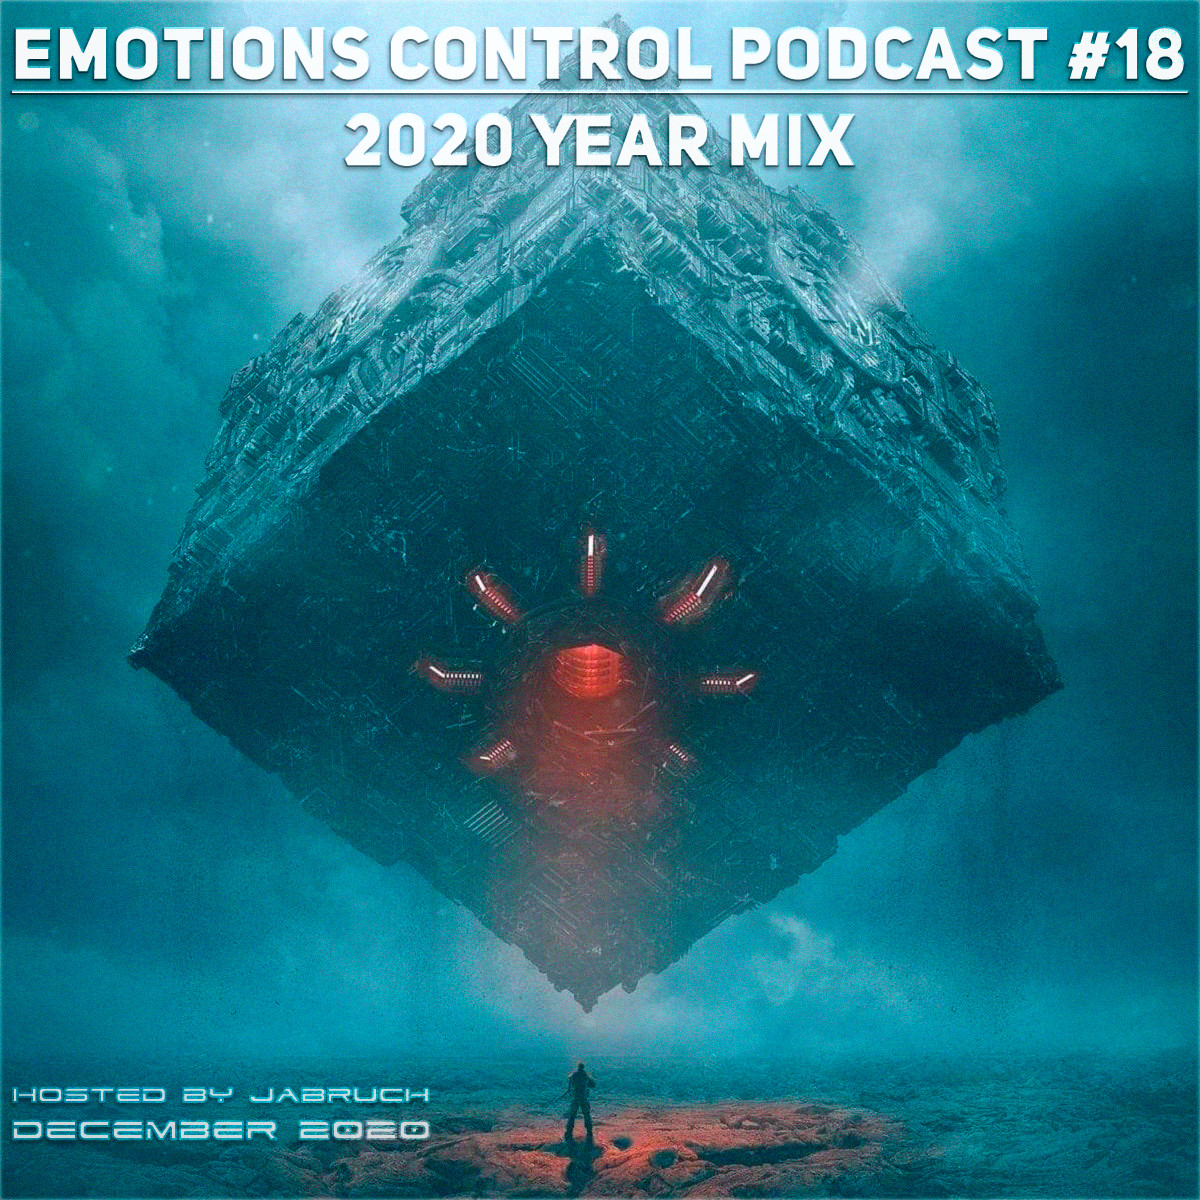 Emotions Control Podcast #18 2020 YEAR MIX [December 2020] #18